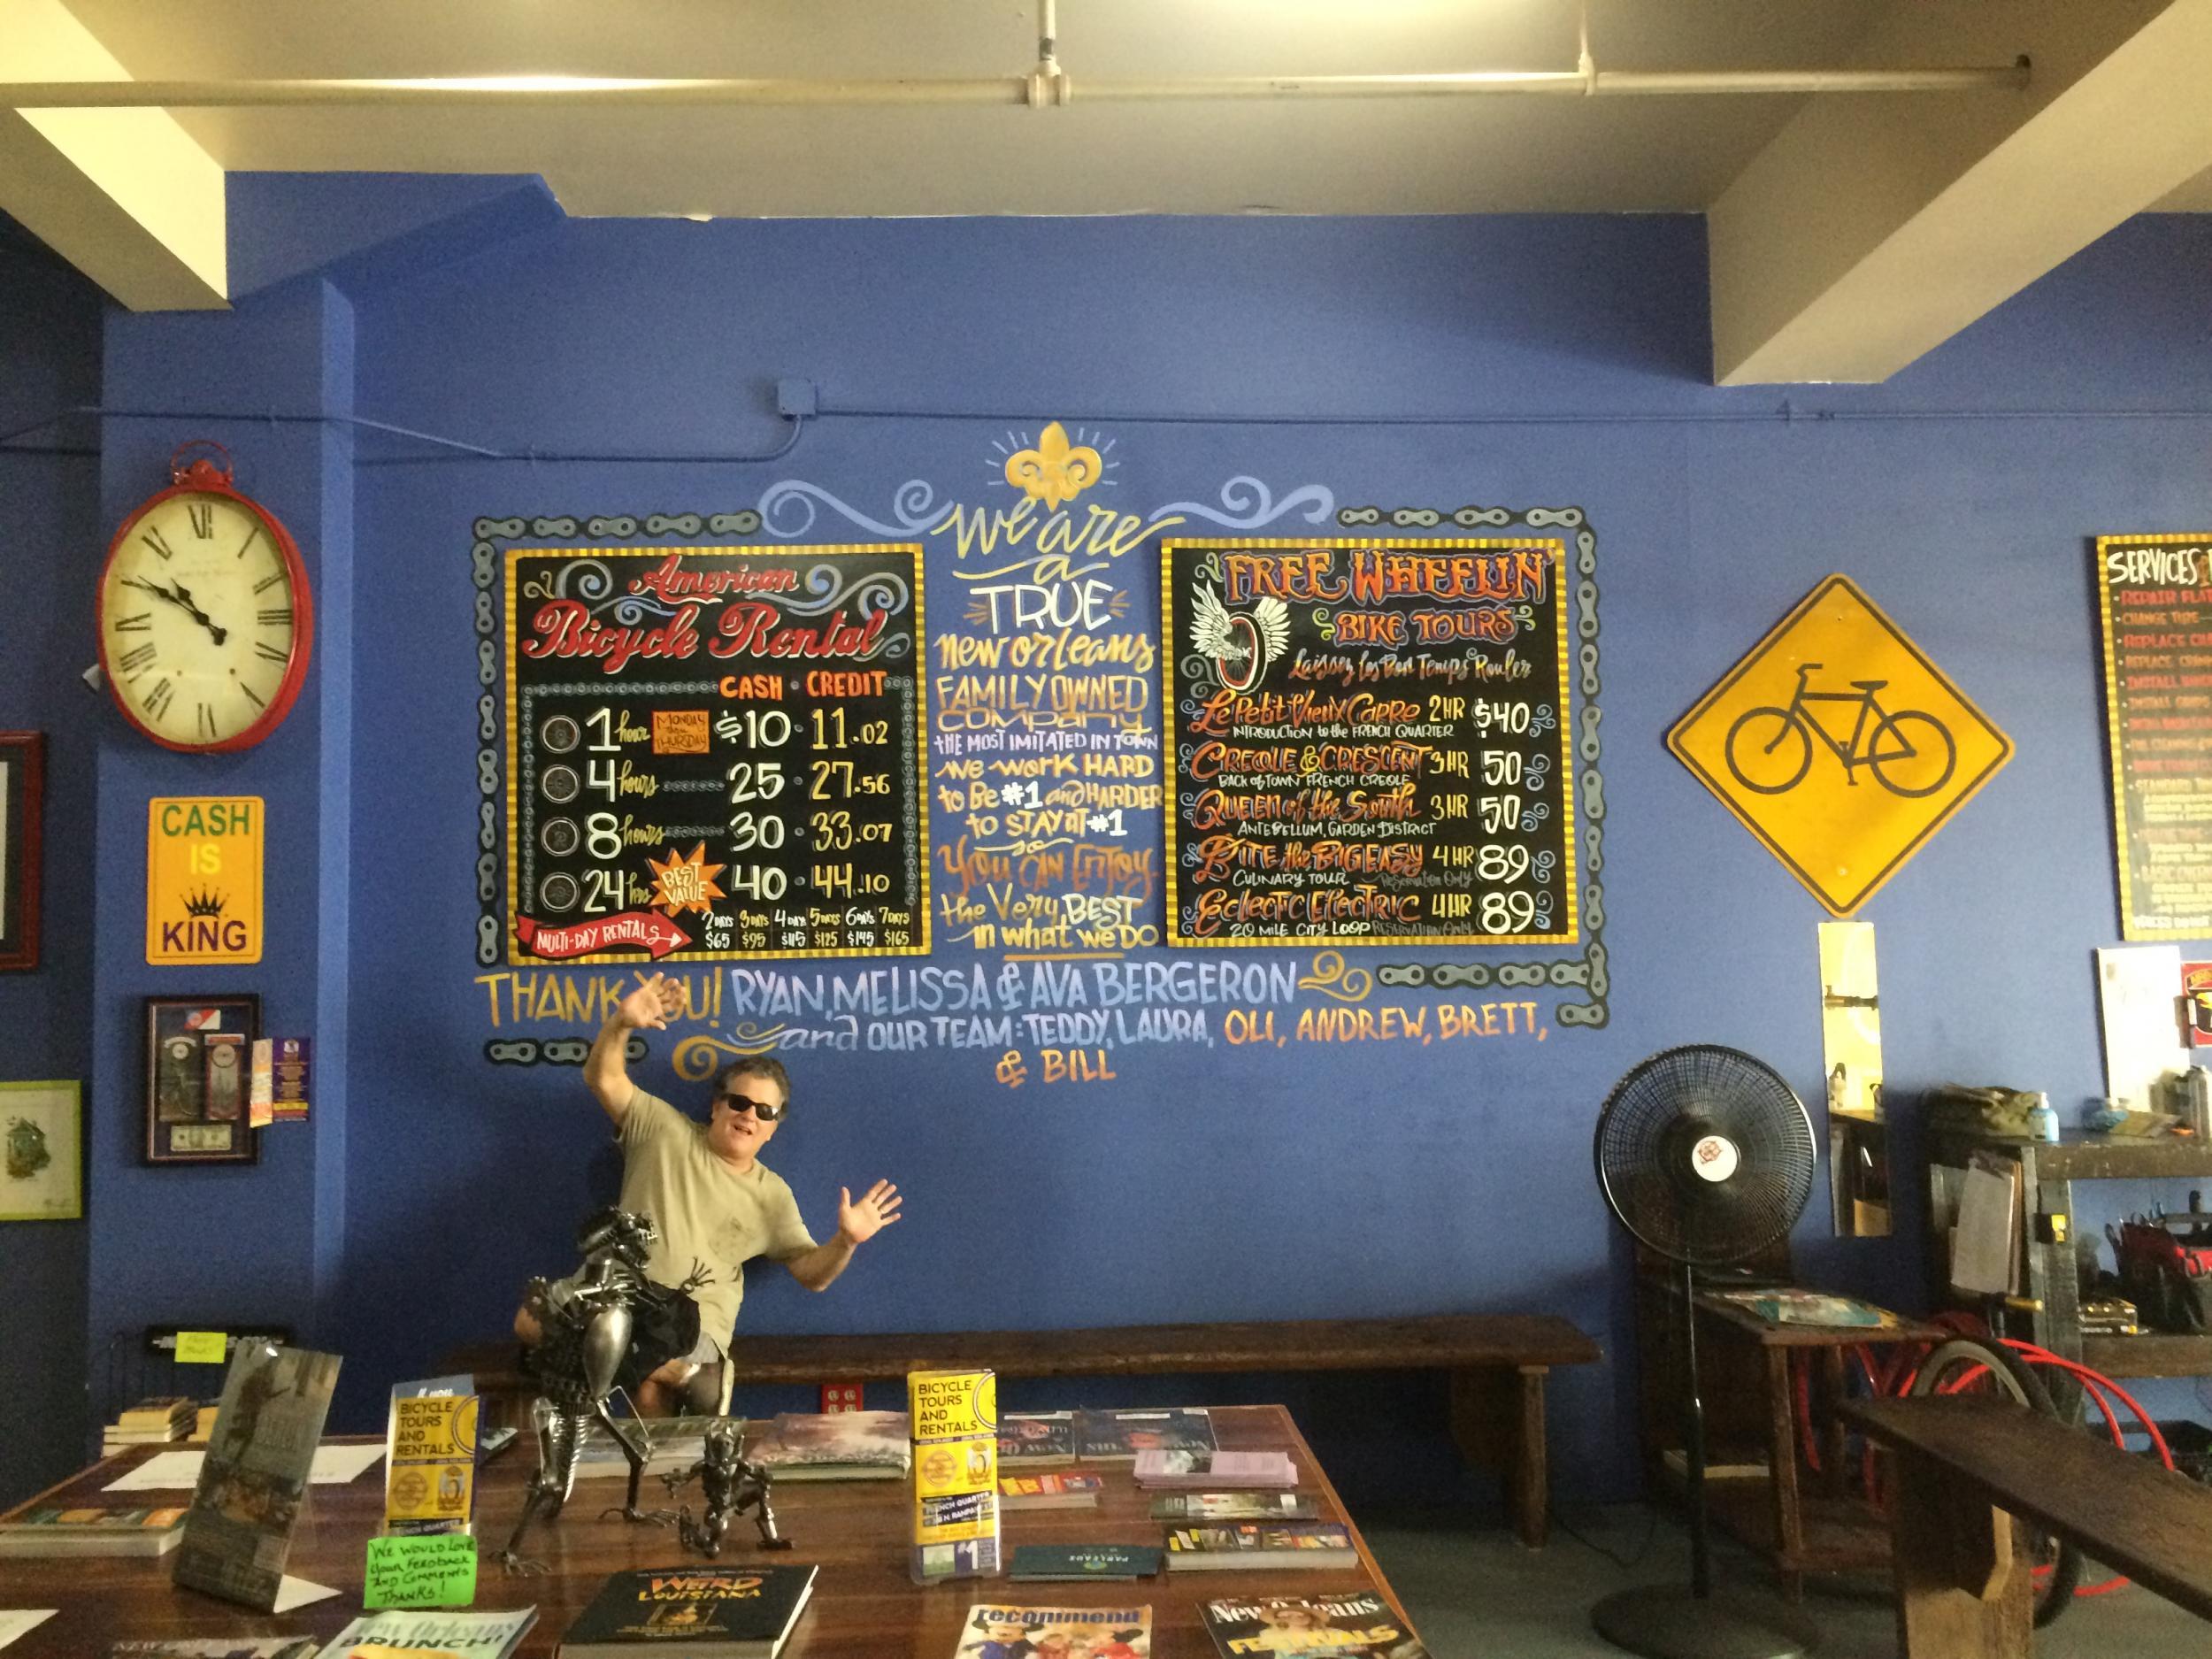 Bike hire shops are thriving in New Orleans as locals increasingly take up cycling (Tamara Hinson)